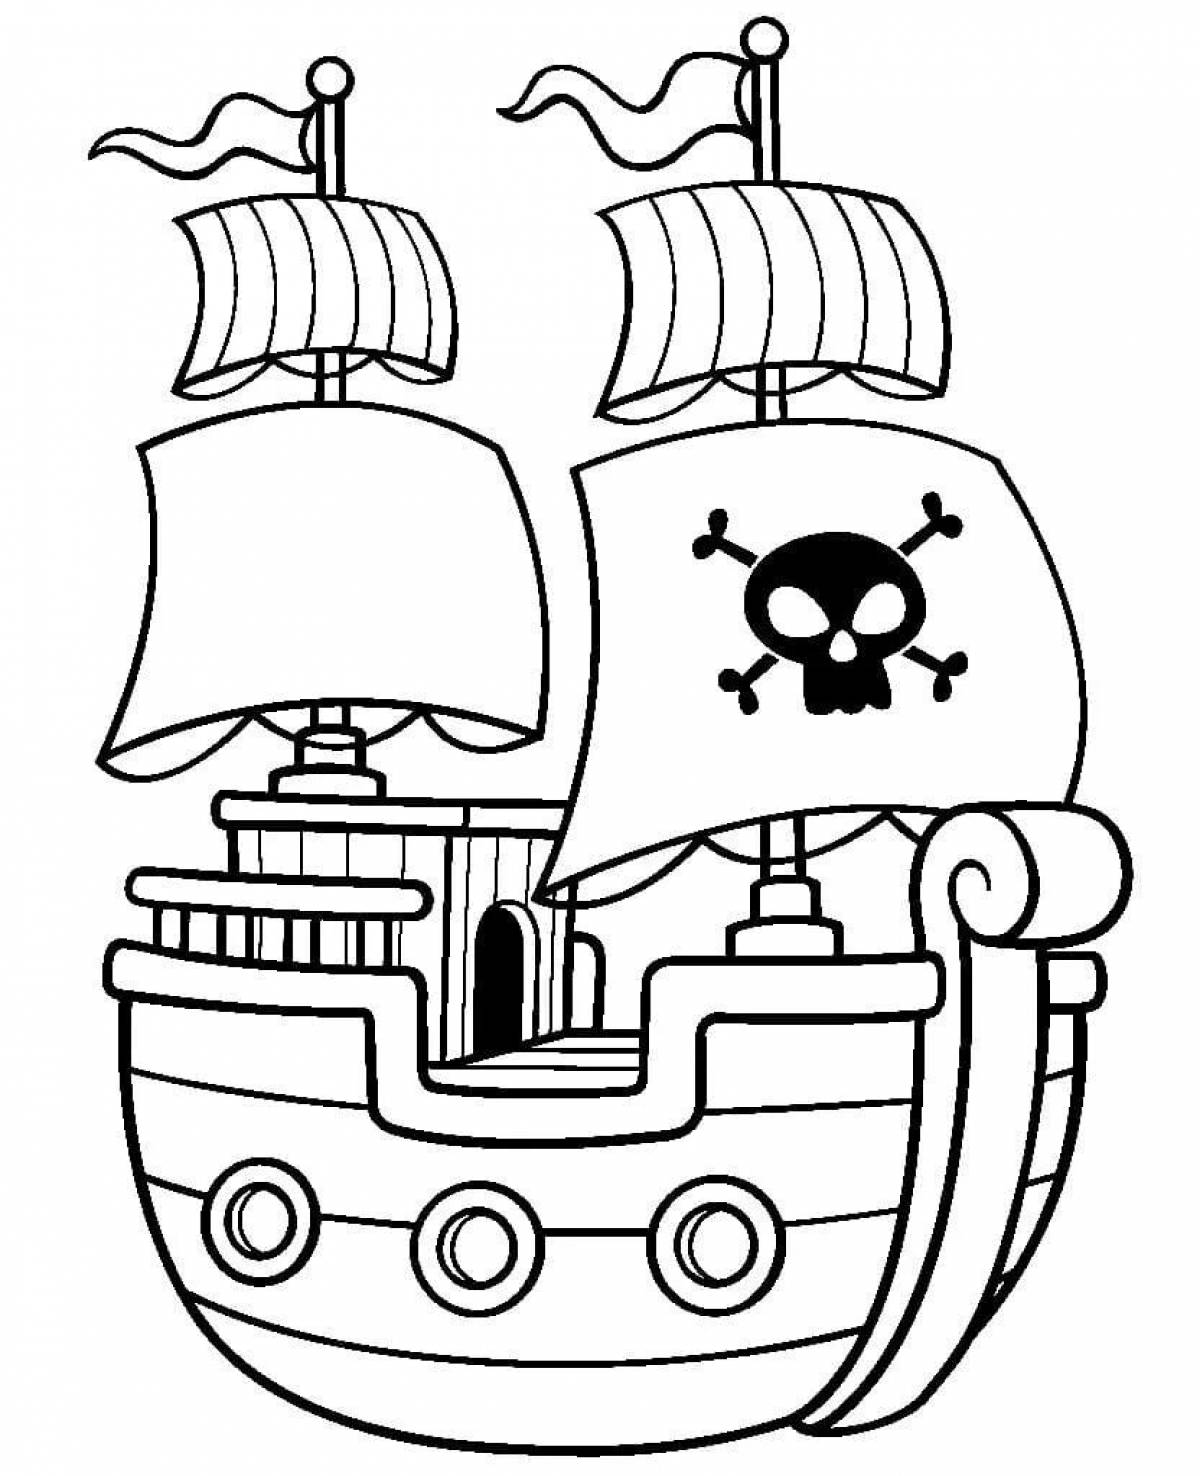 Pirate ship for kids #4